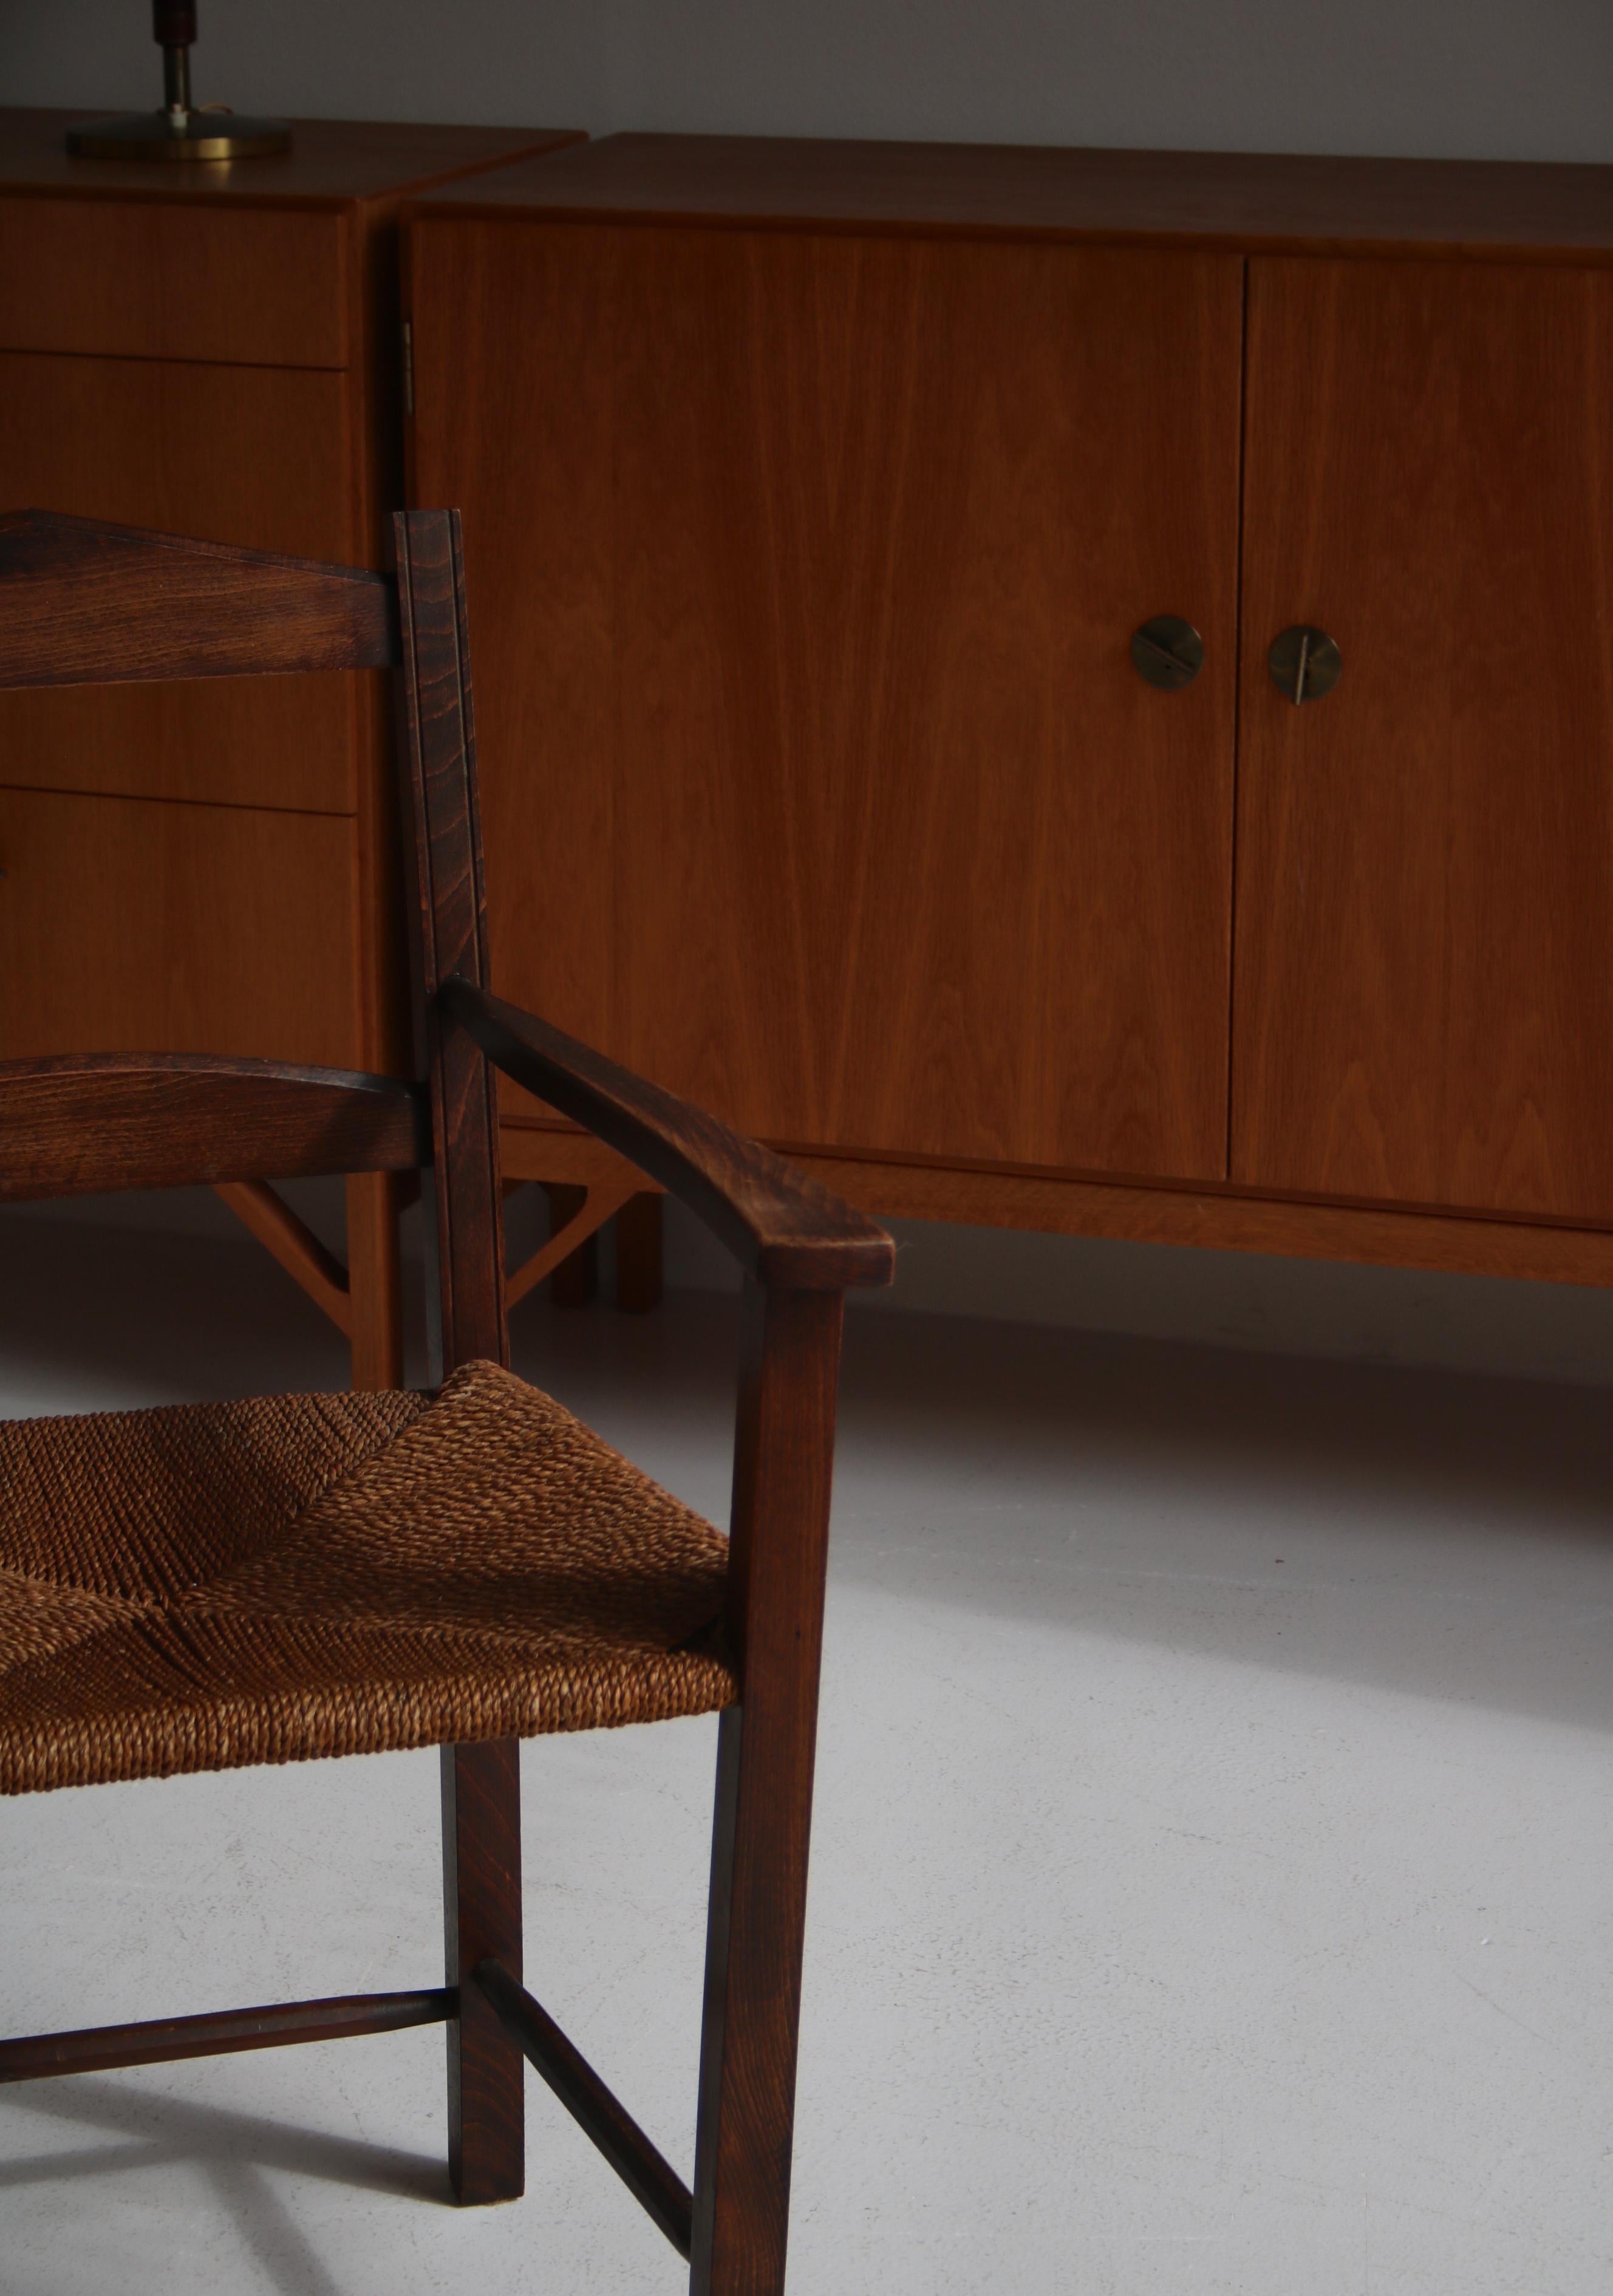 Pair of Armchairs in Dark Stained Pine and Seagrass Danish Cabinetmaker, 1940s For Sale 11